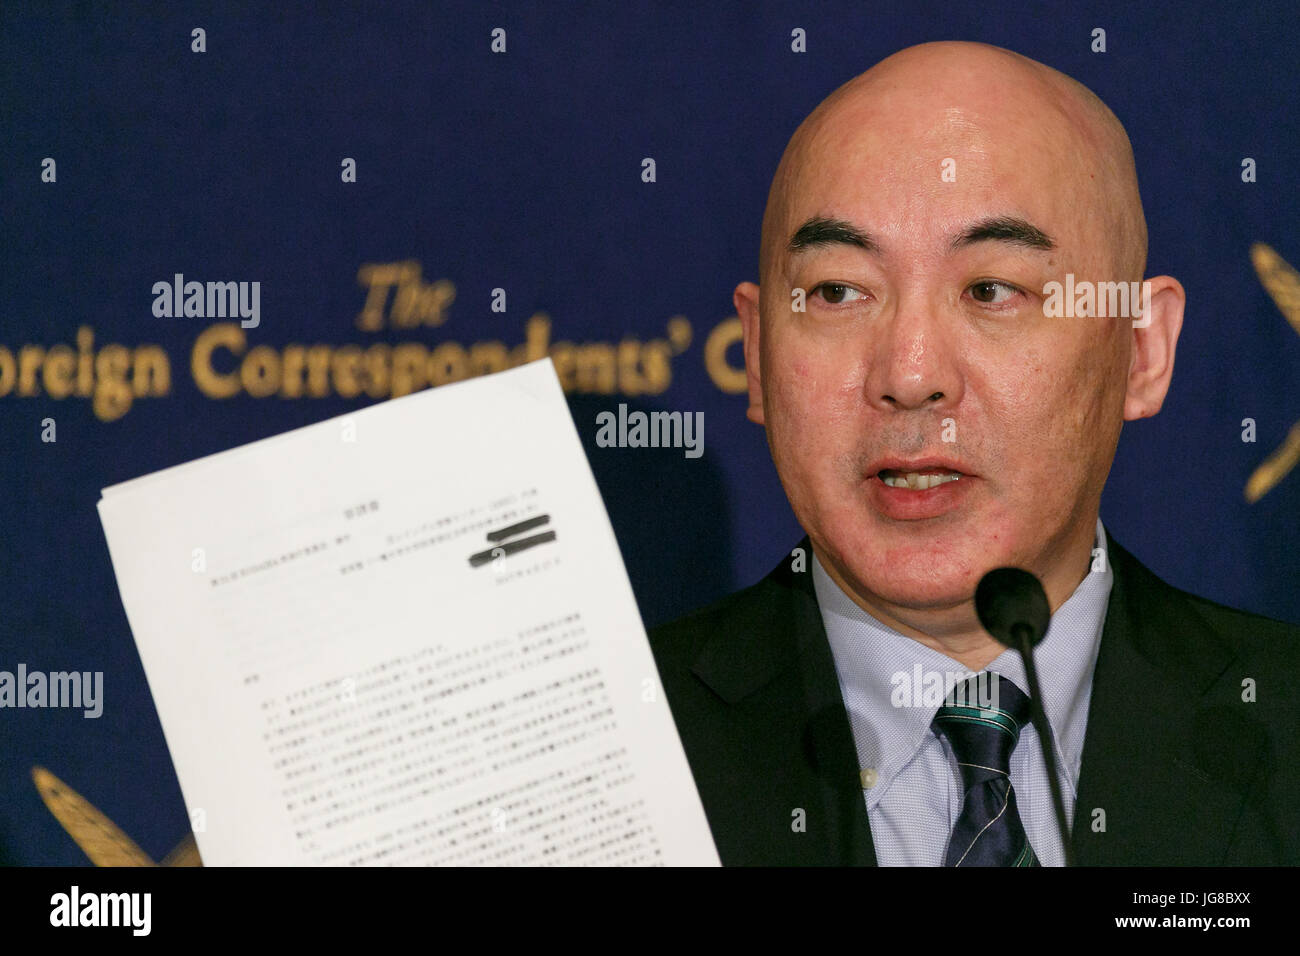 Japanese author Naoki Hyakuta speaks during a news conference at The Foreign Correspondents' Club of Japan on July 4, 2017, Tokyo, Japan. Hyakuta, who's views include denial of the Nanking massacre, spoke about the cancellation of his lecture at Hitotsubashi University because a group of students, belonging to the school's Anti-Racism Information Center (ARIC), had argued that his views were discriminatory toward certain ethnic groups and that he shouldn't be allowed to speak at the University festival. Credit: Rodrigo Reyes Marin/AFLO/Alamy Live News Stock Photo